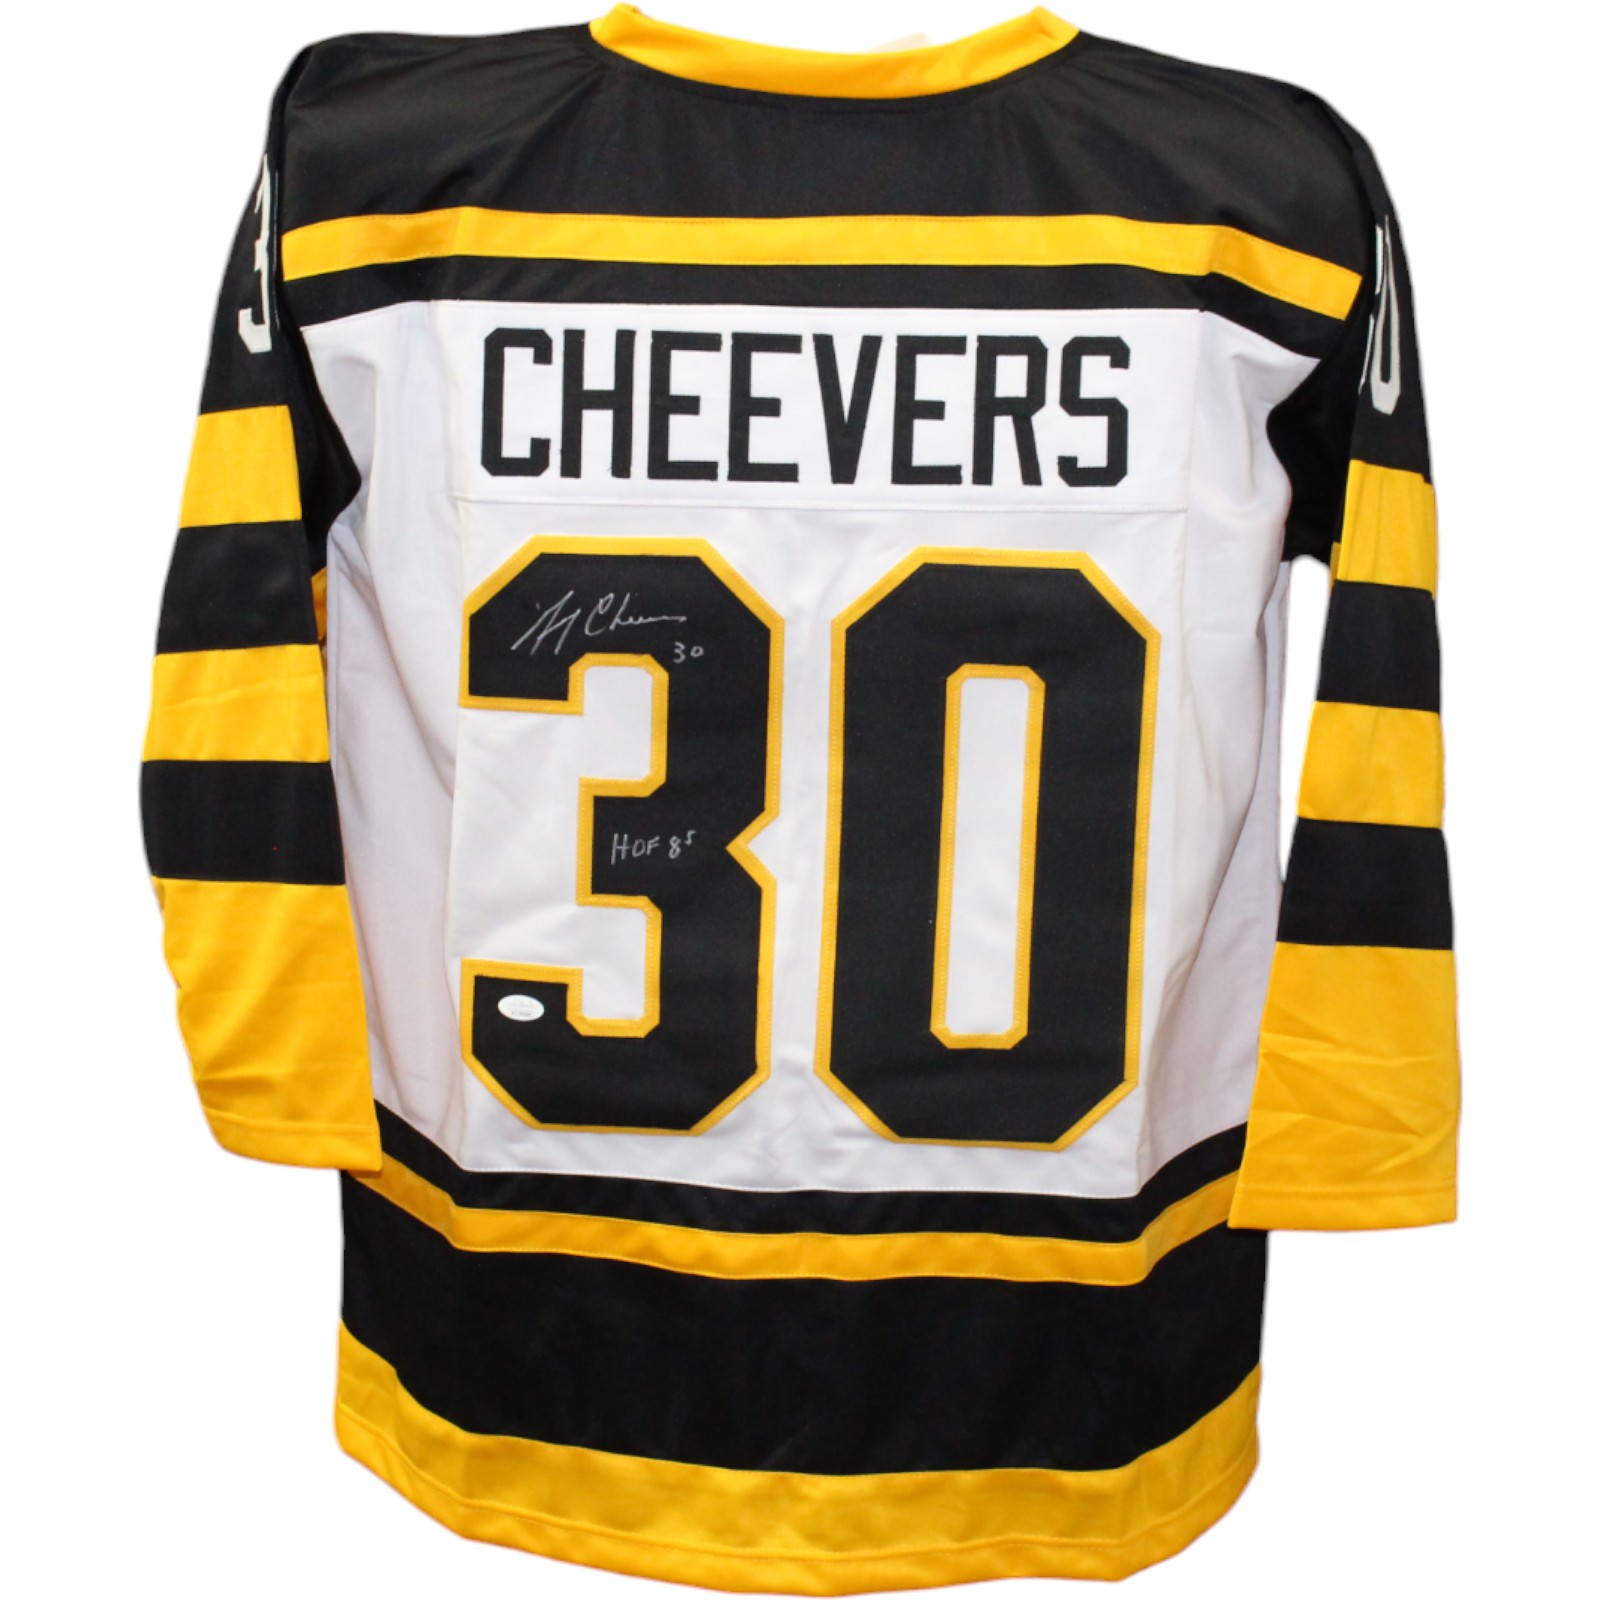 Gerry Cheevers Autographed/Signed Pro Style White Jersey JSA